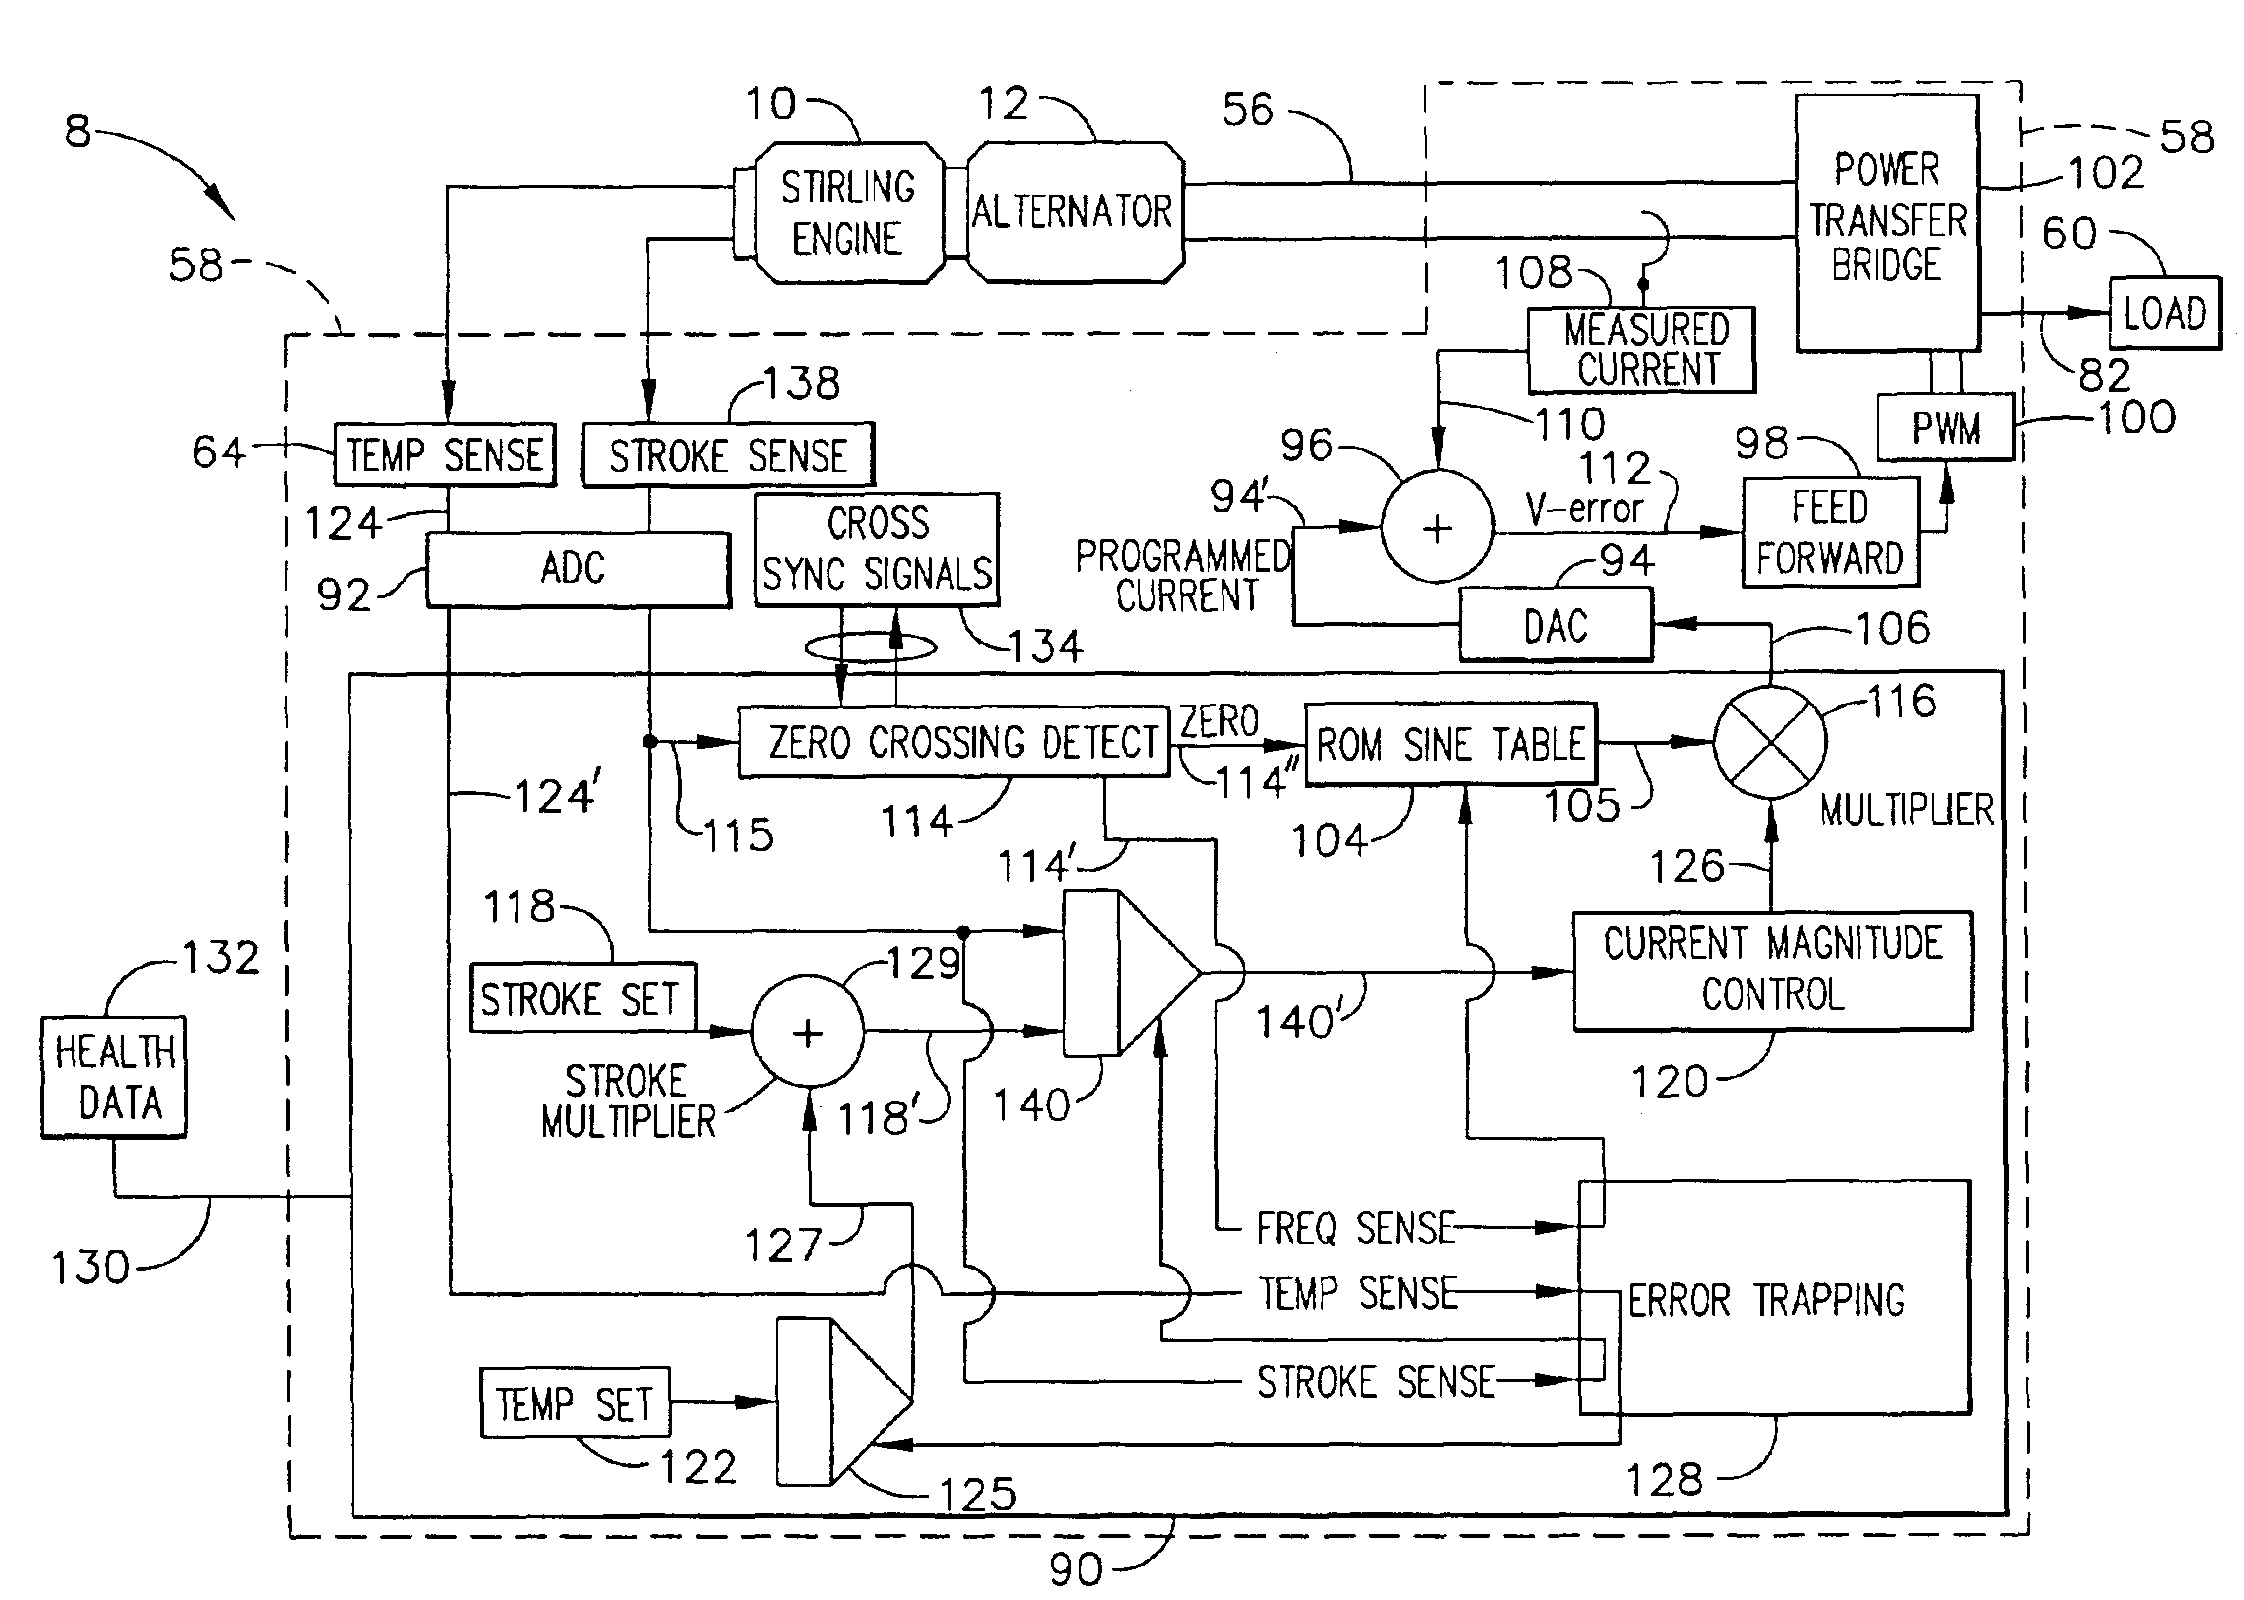 Thermal cycle engine boost bridge power interface